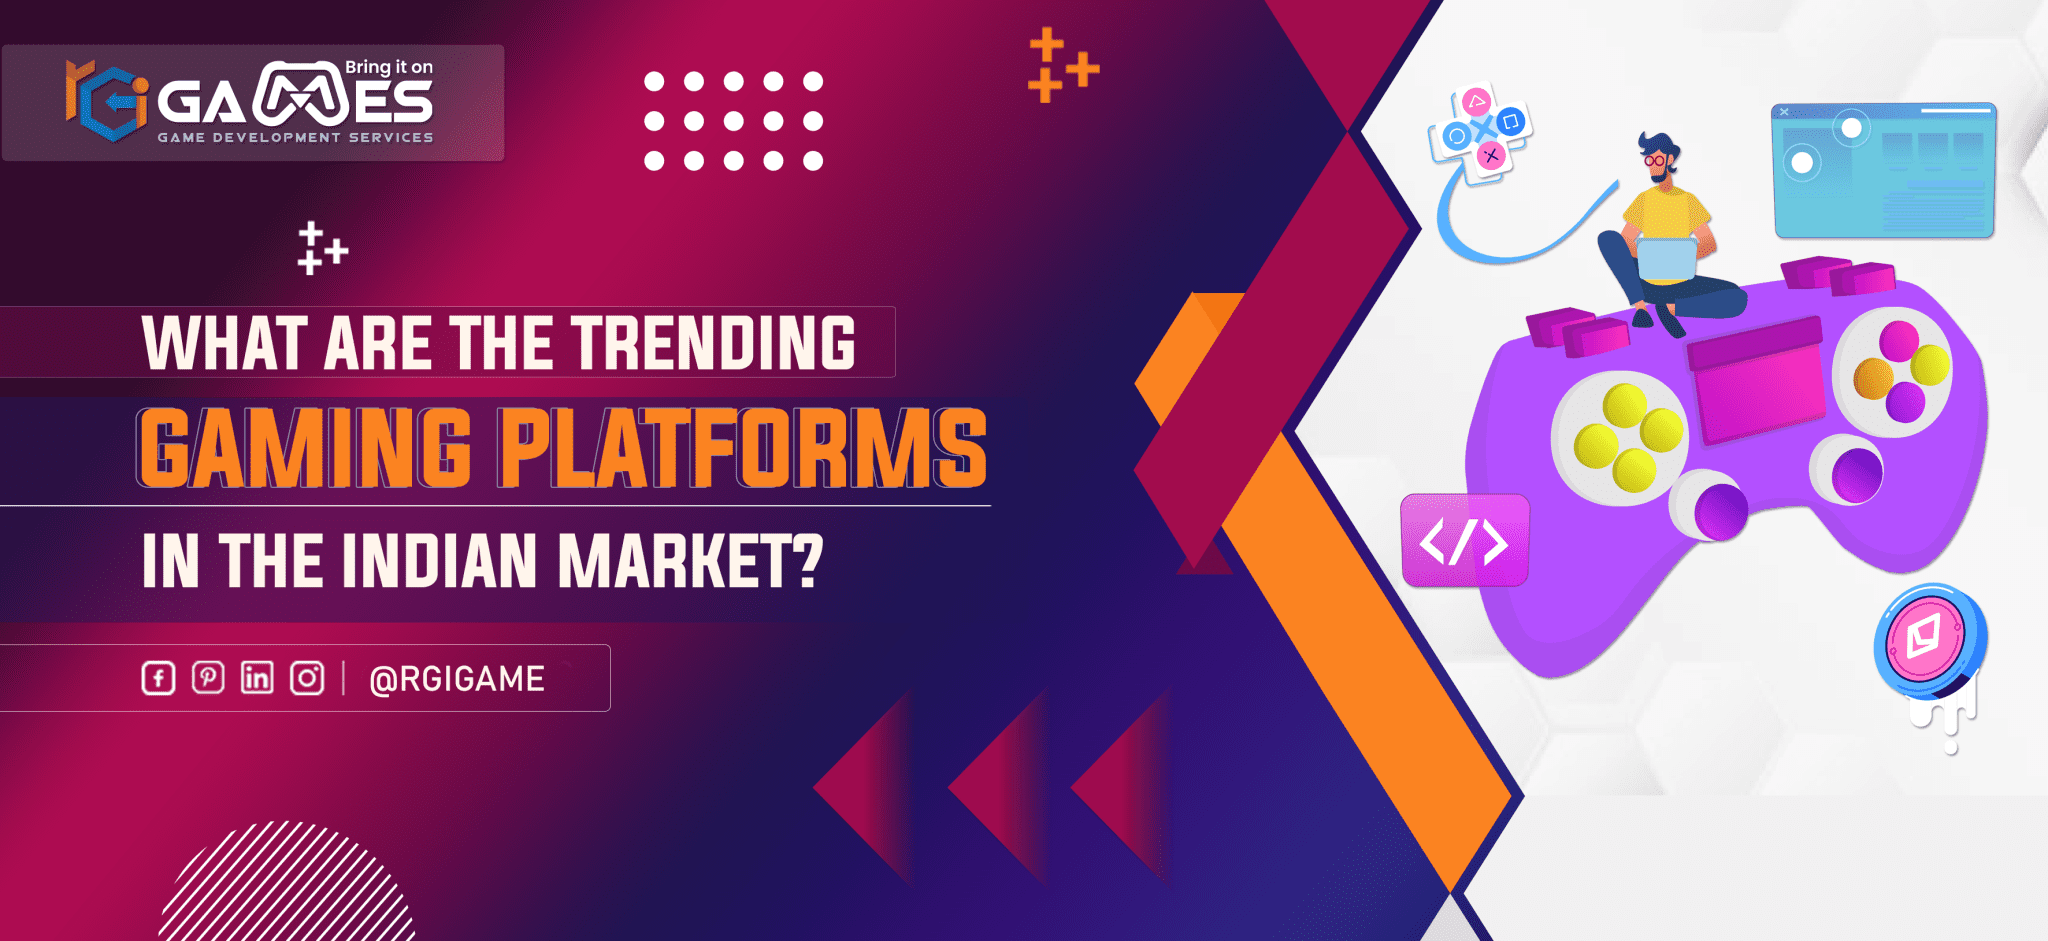 What are the trending gaming platforms in the Indian market